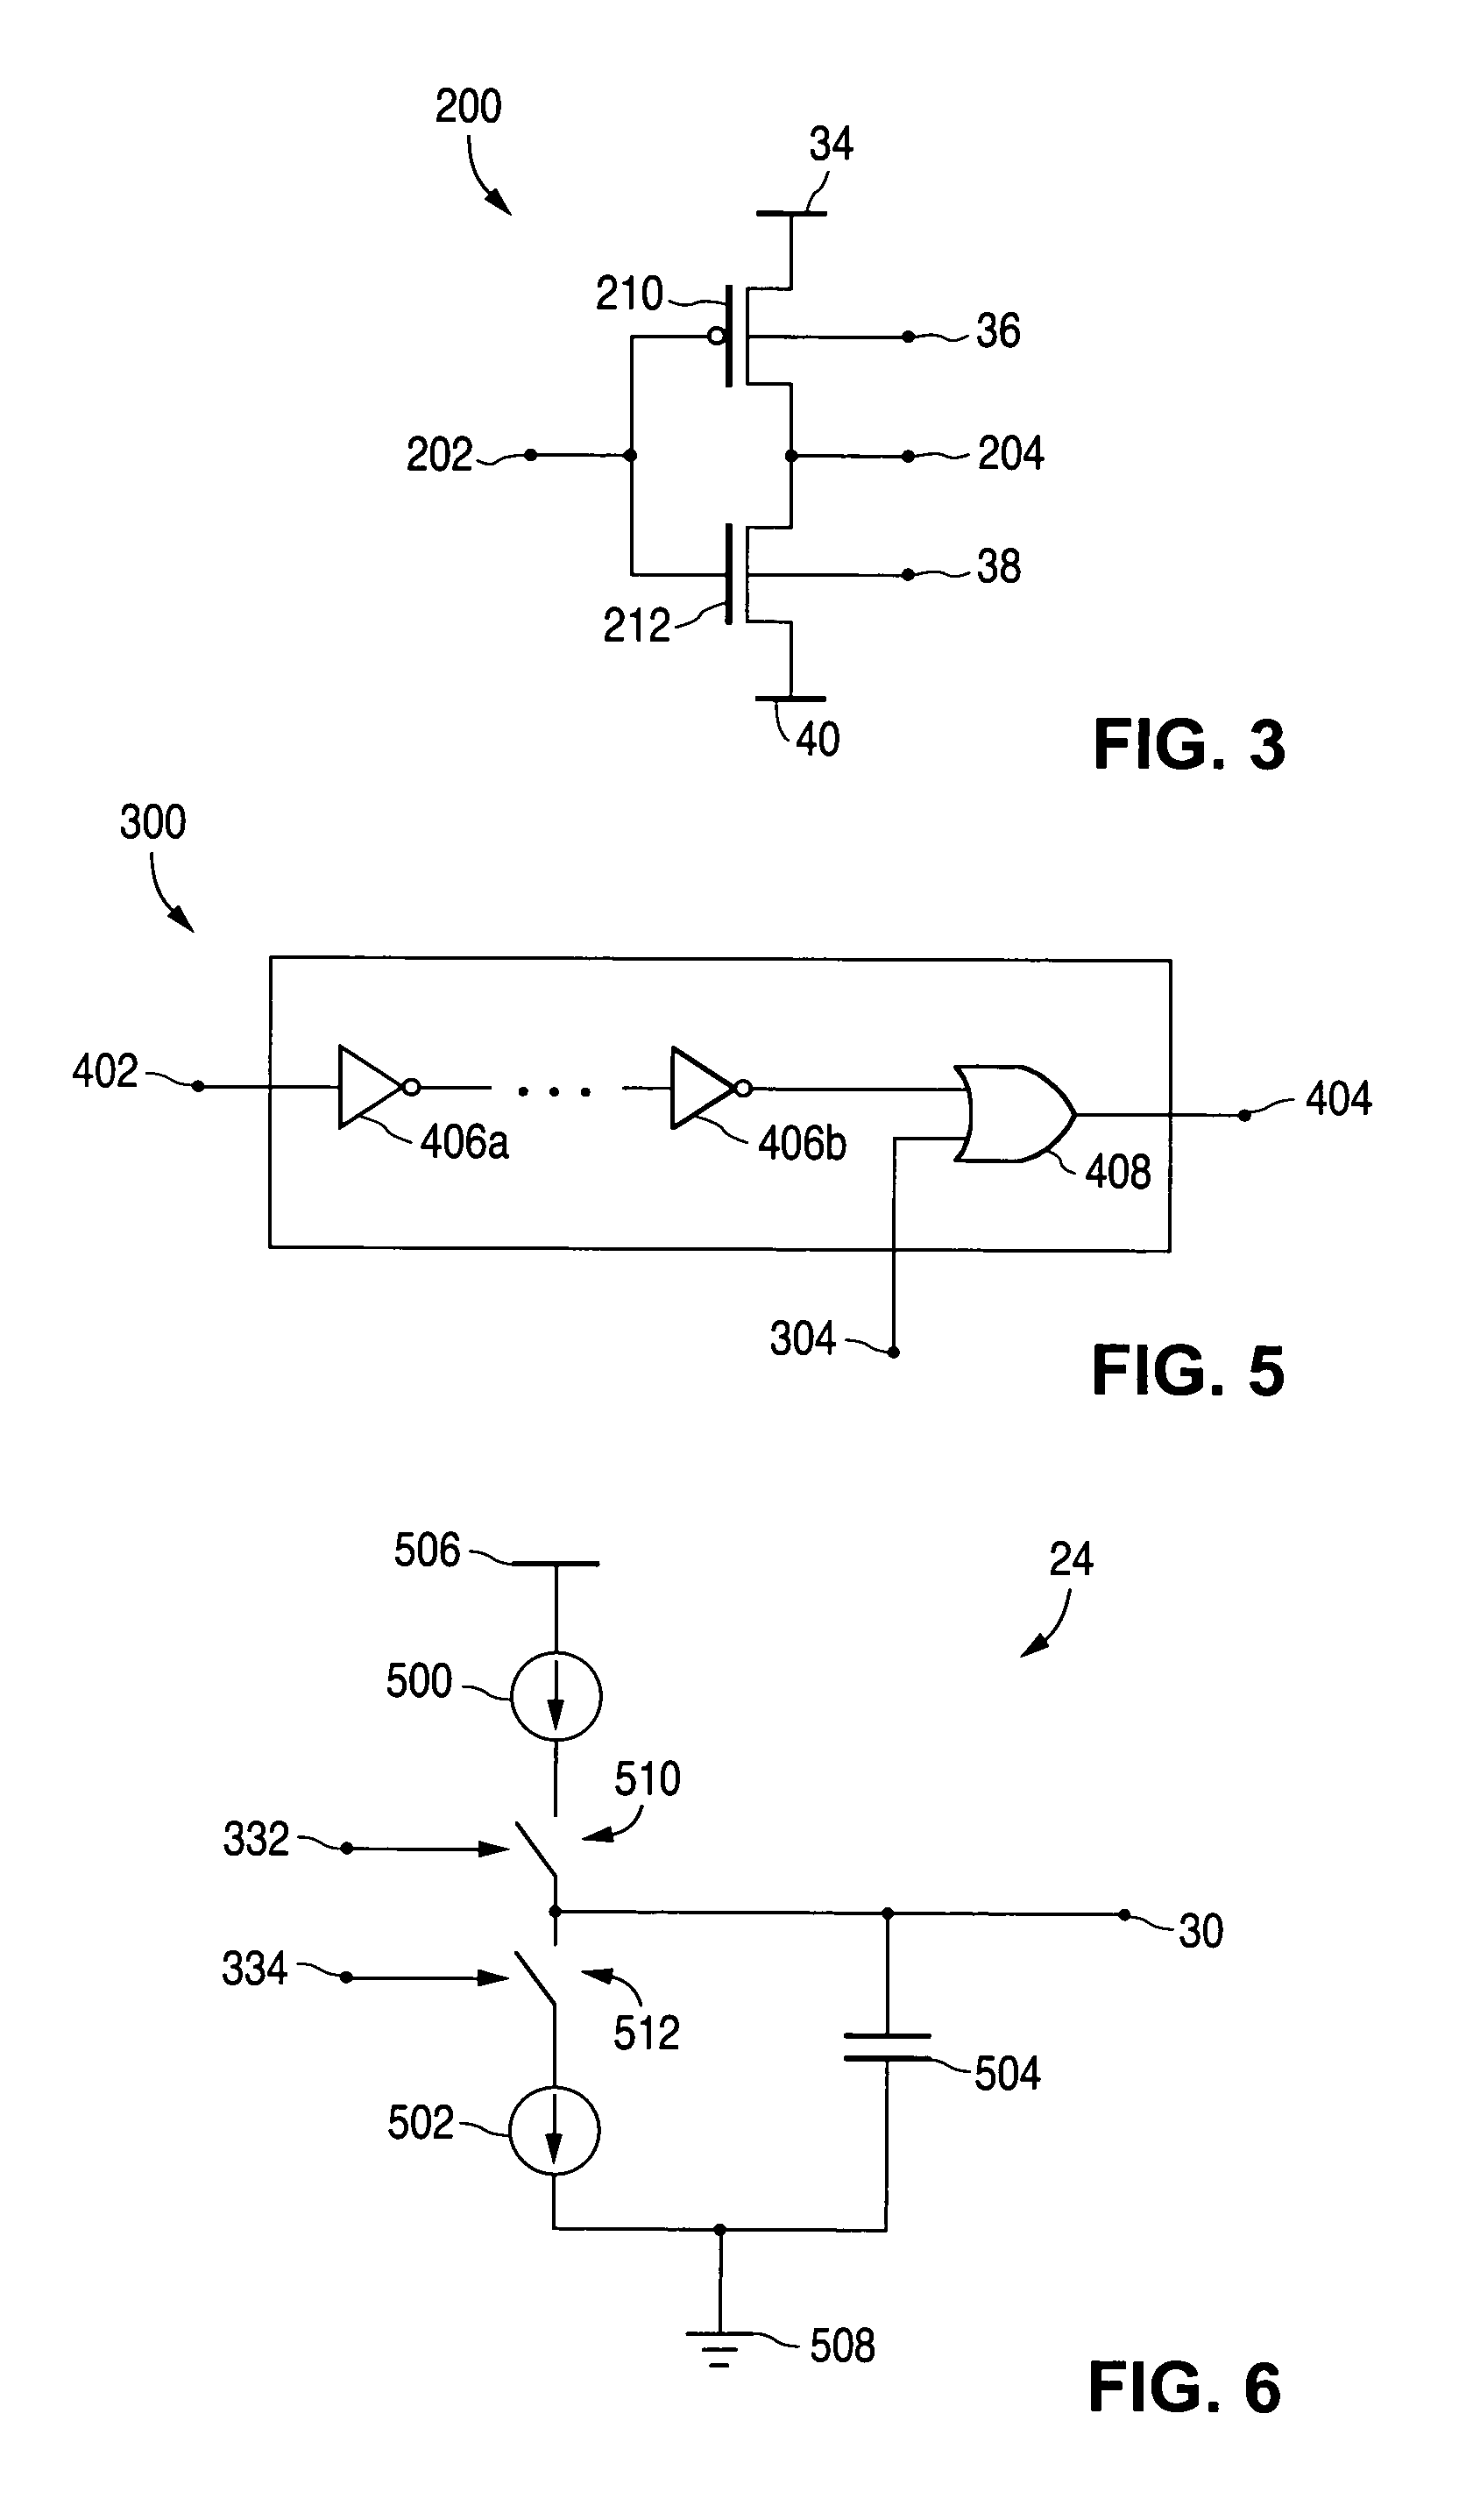 Method and system for minimizing power consumption in mobile devices using cooperative adaptive voltage and threshold scaling